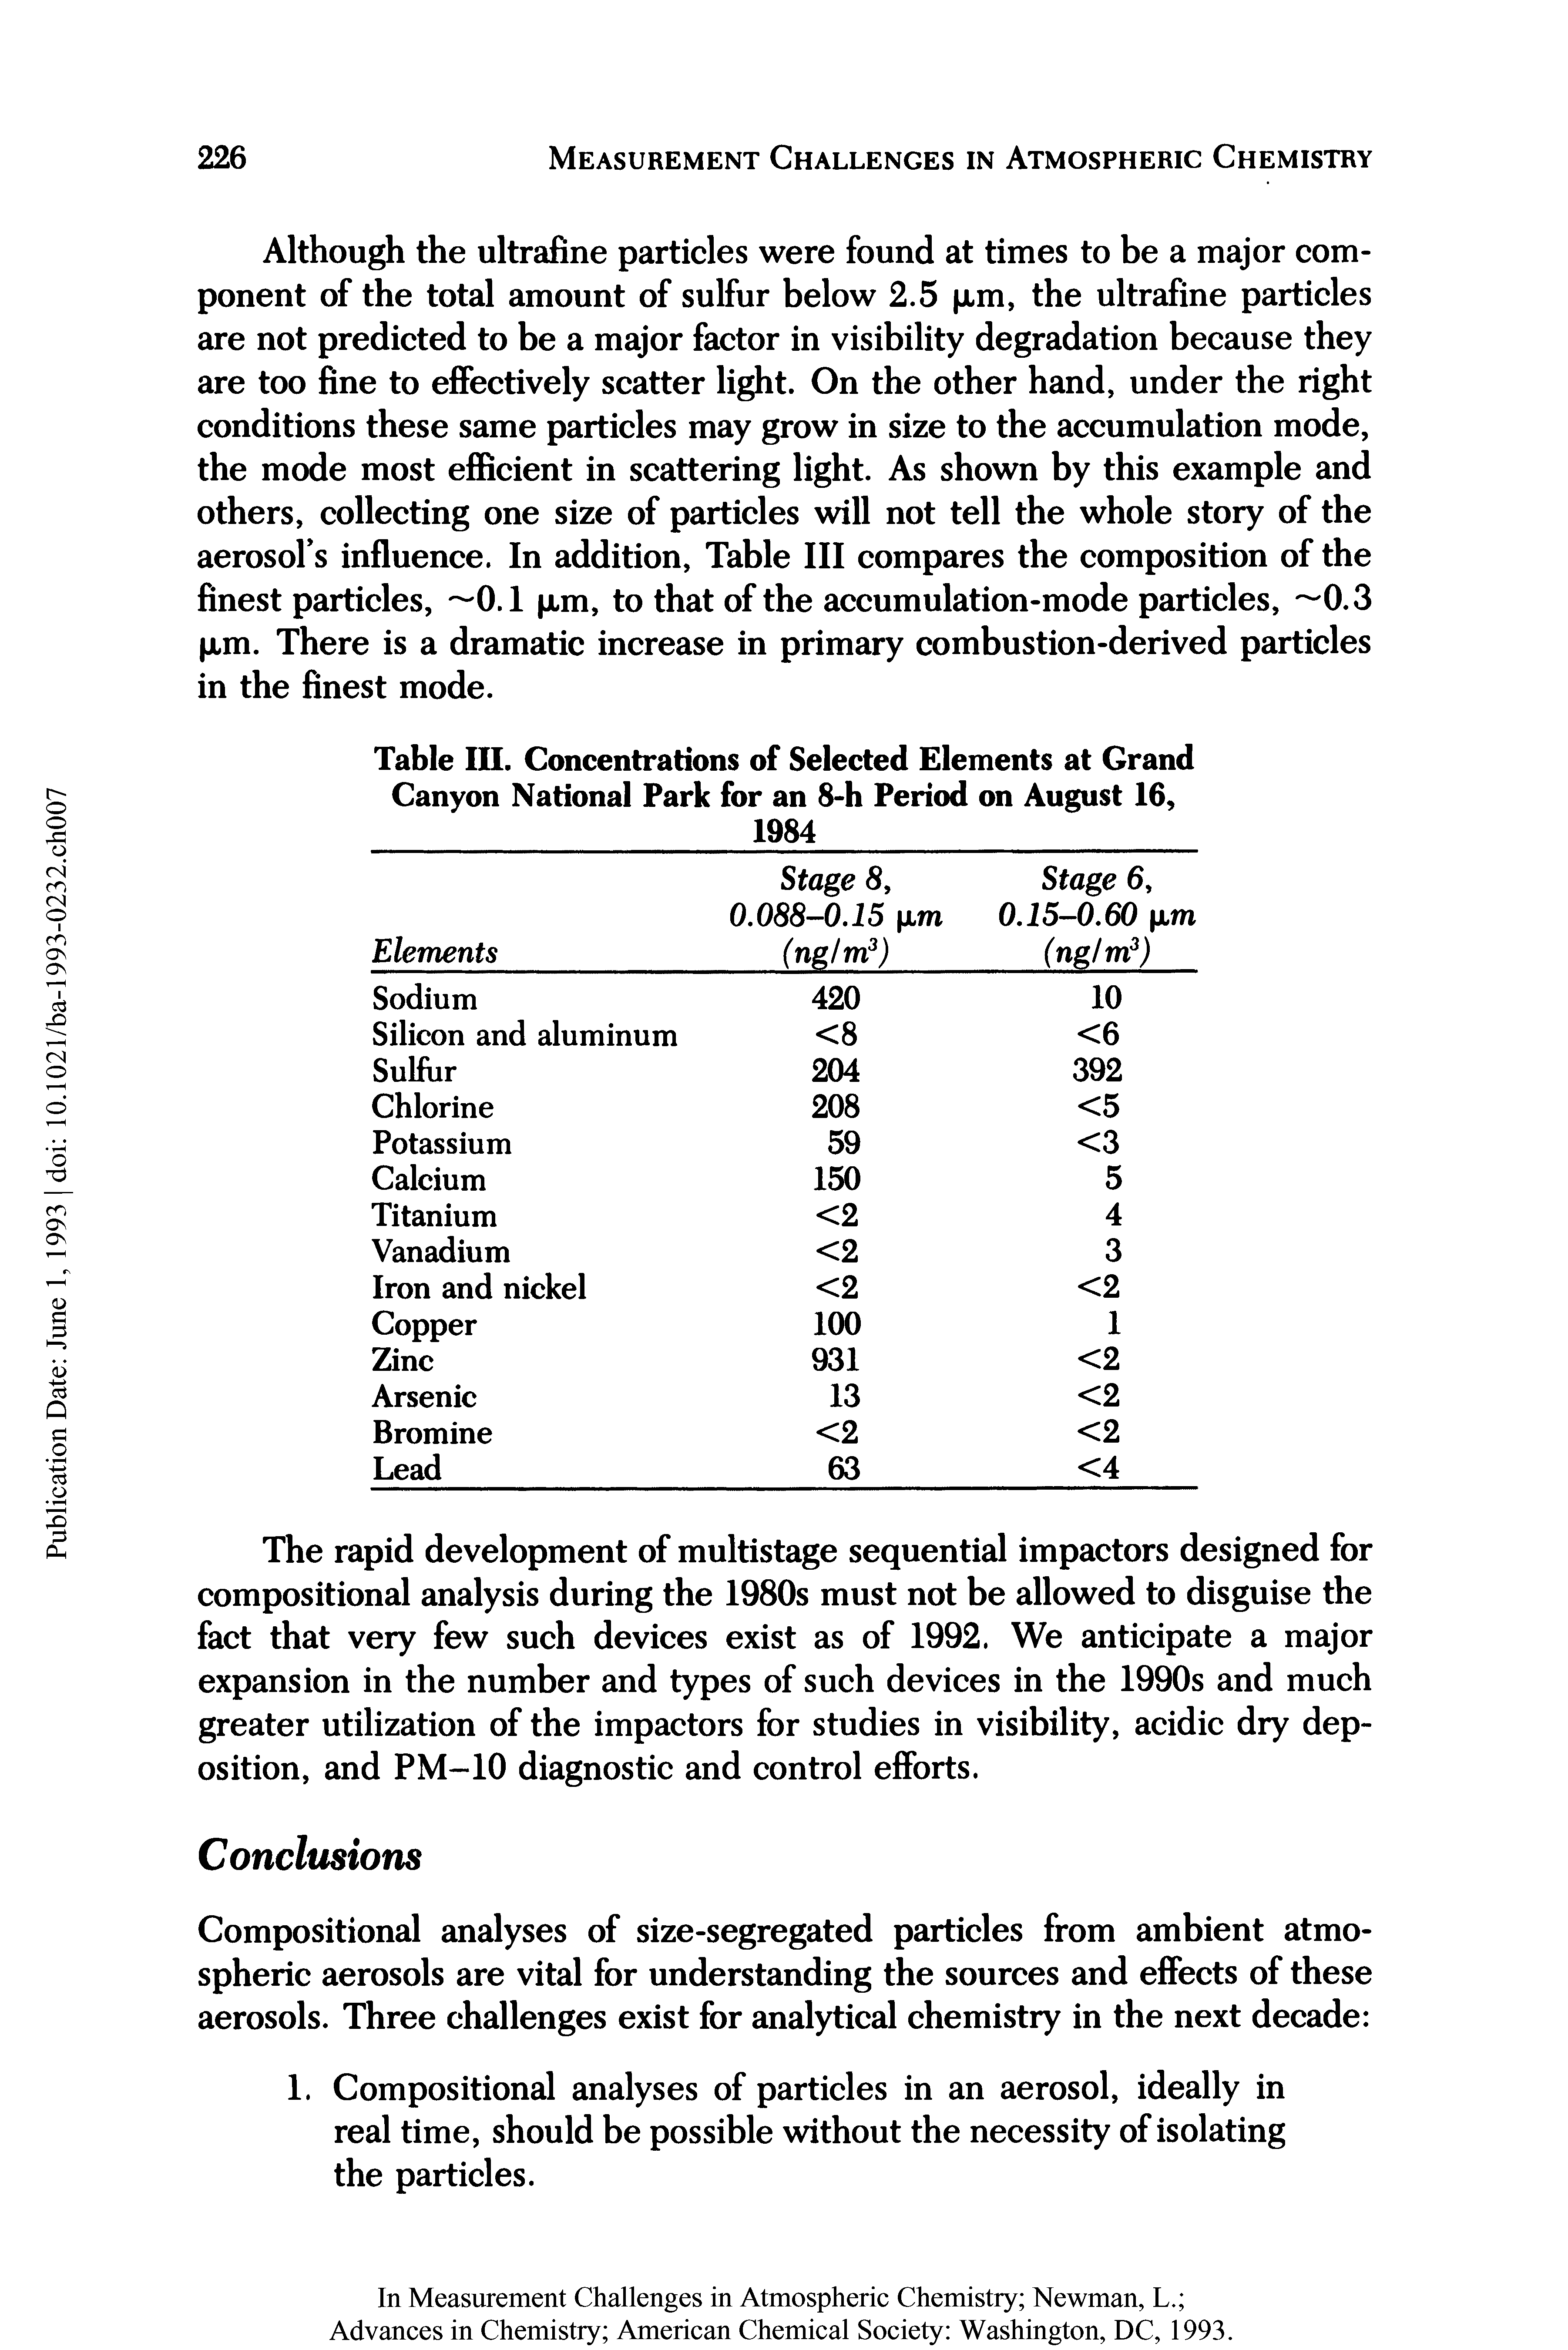 Table III. Concentrations of Selected Elements at Grand Canyon National Park for an 8-h Period on August 16, 1984...